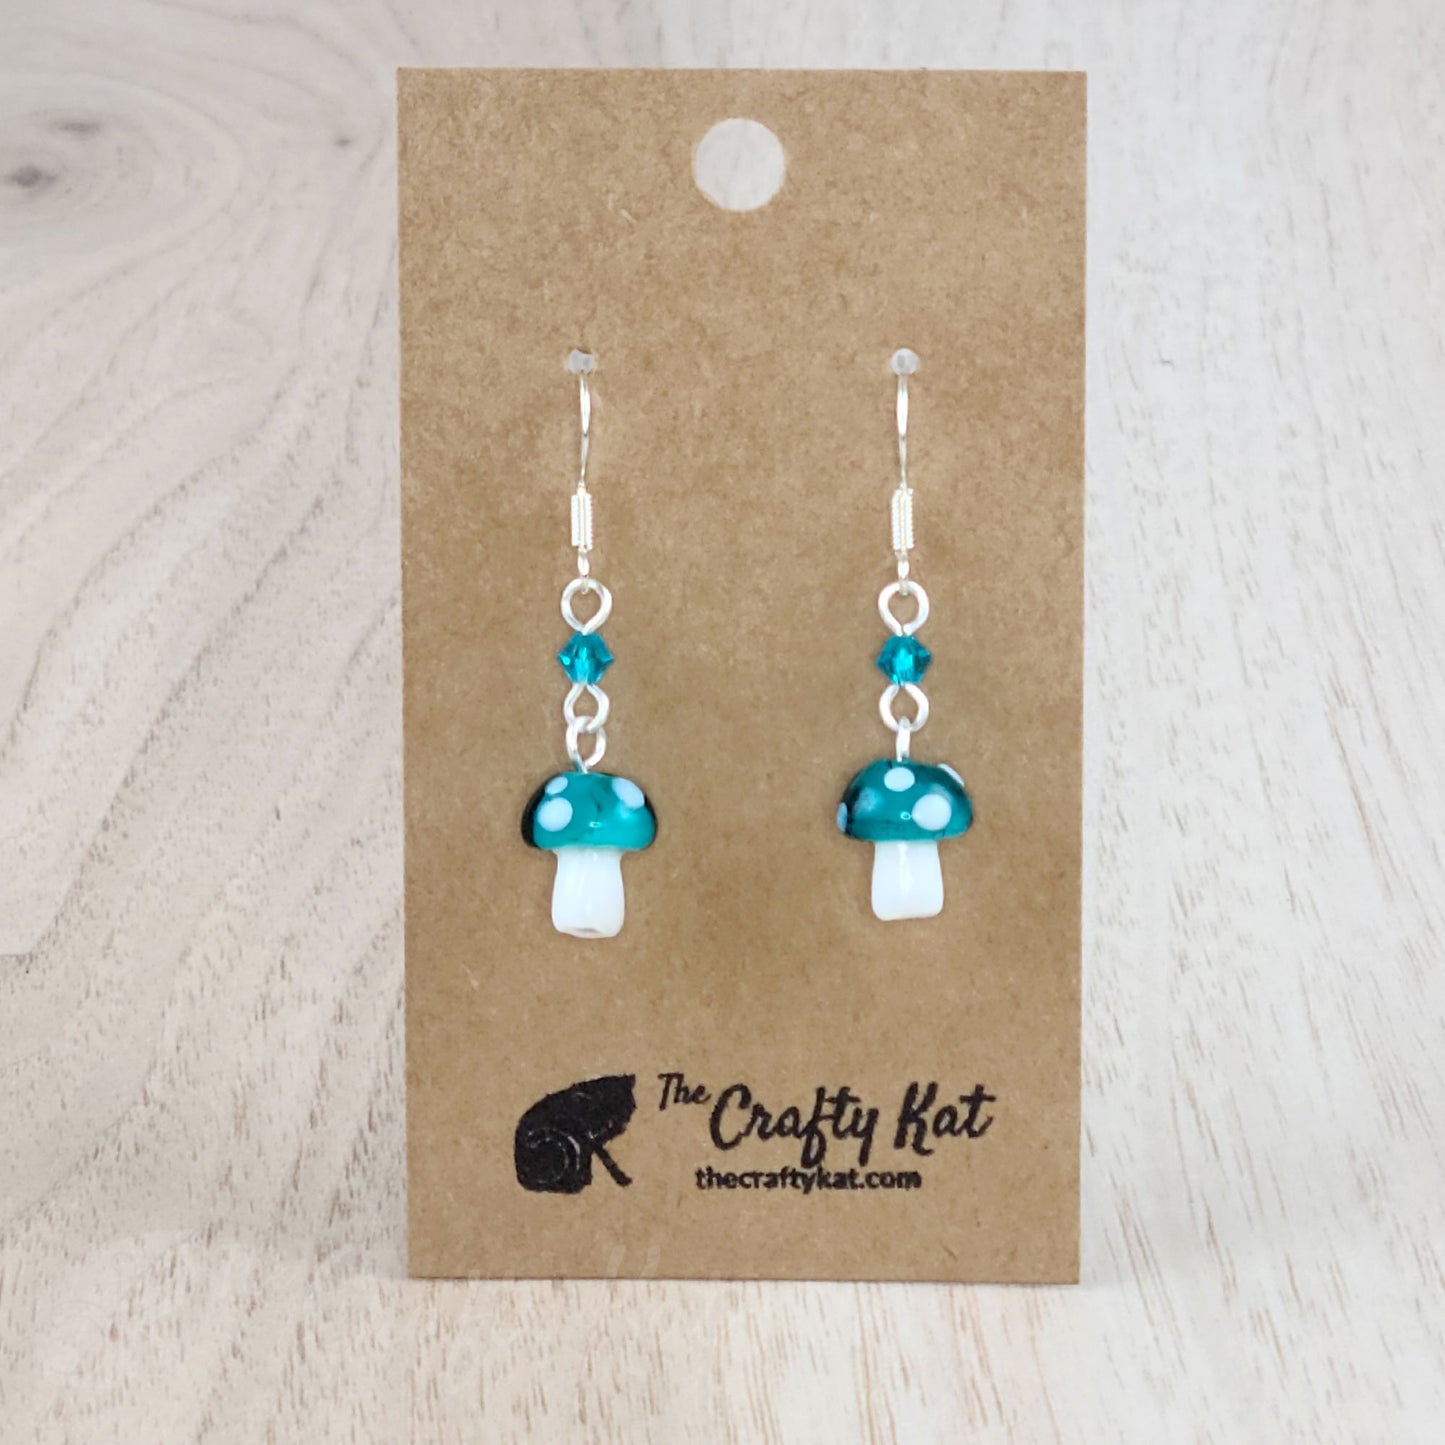 Mushroom-shaped tiered earrings made of lampwork and pressed glass beads with silver-plated base metal fittings. These mushrooms are dark teal with white spots.